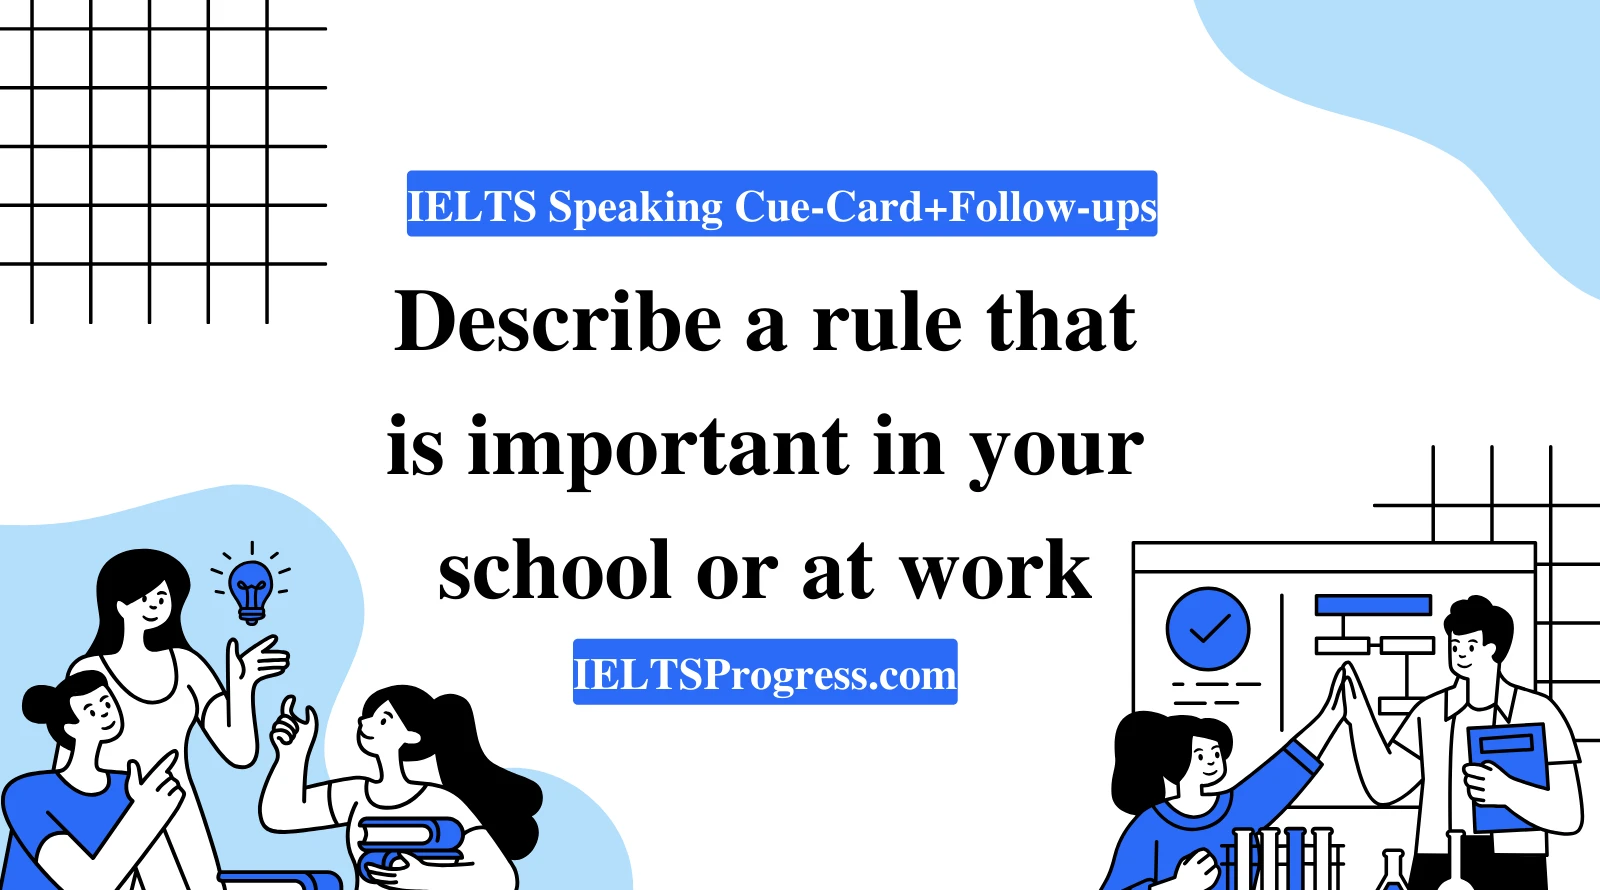 Describe a rule that is important in your school or at work IELTS Speaking cue card answer